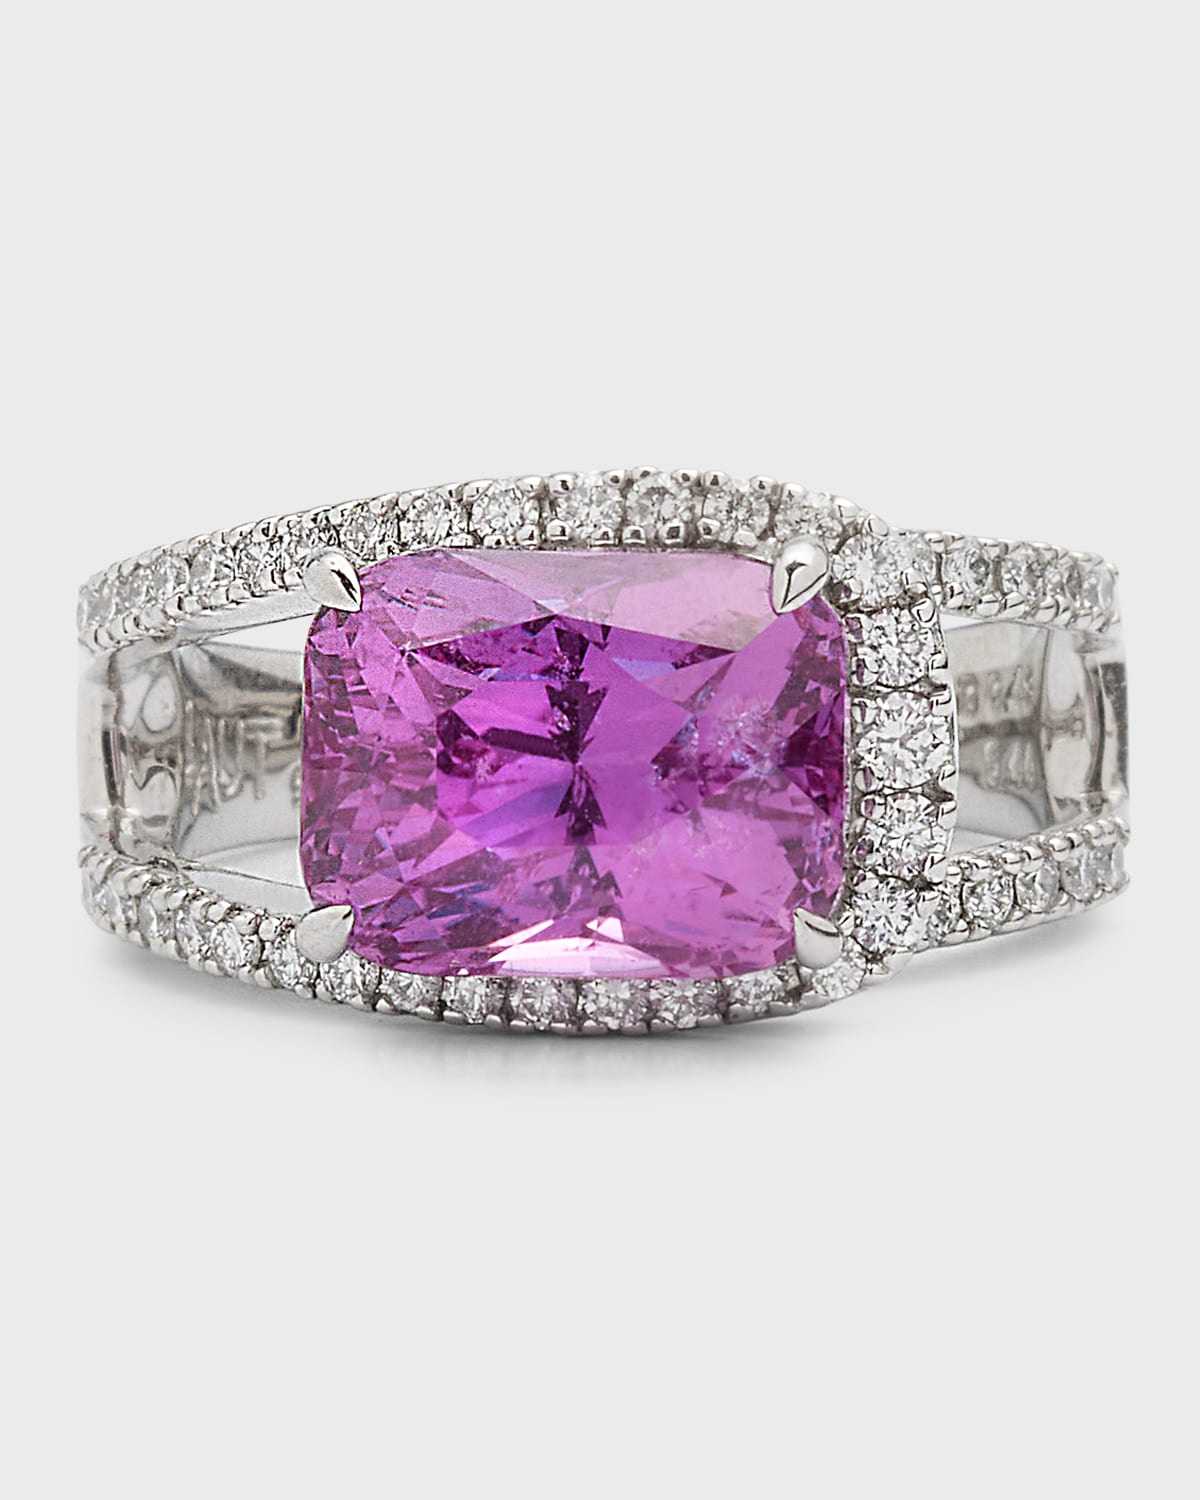 Alexander Laut 18K Ruby and Diamond Ring, Size 6.5 | Neiman Marcus